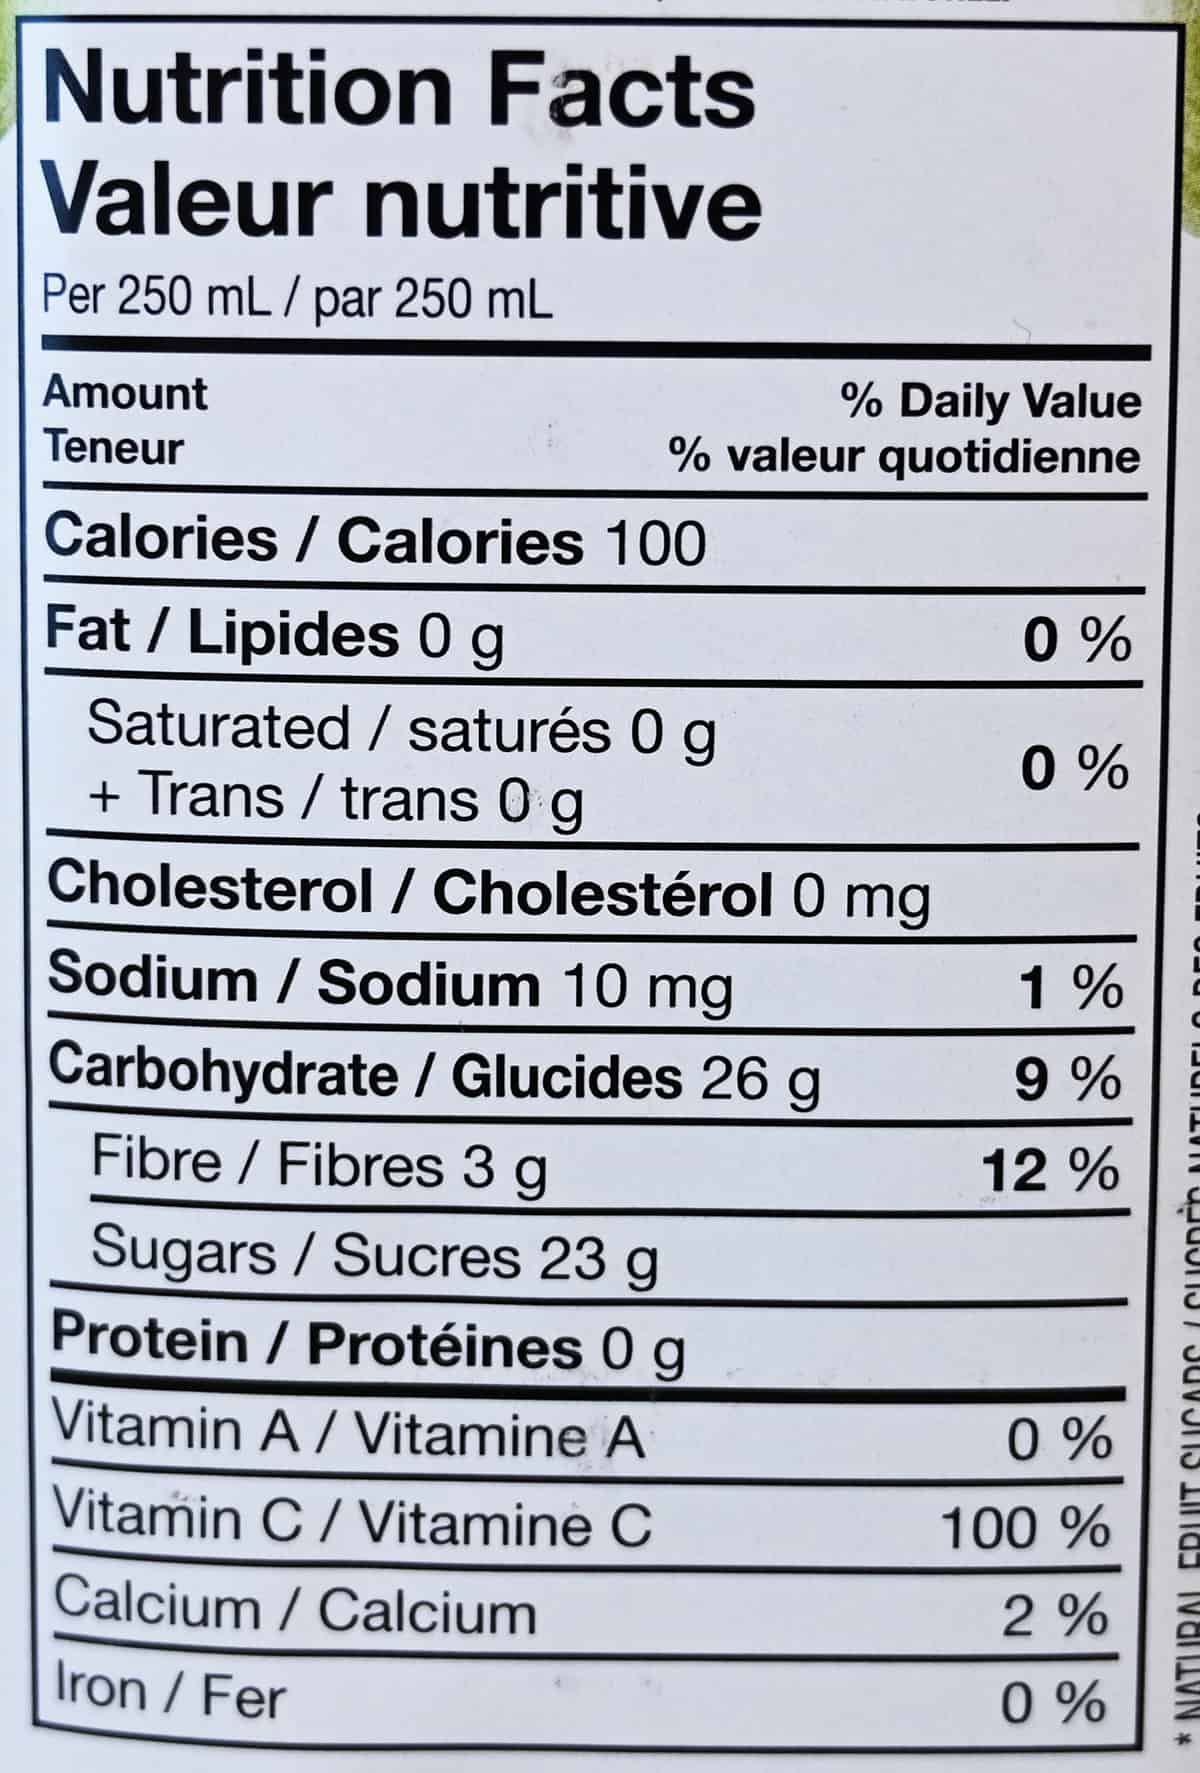 Image of the nutrition facts for the juice from the back of the container.